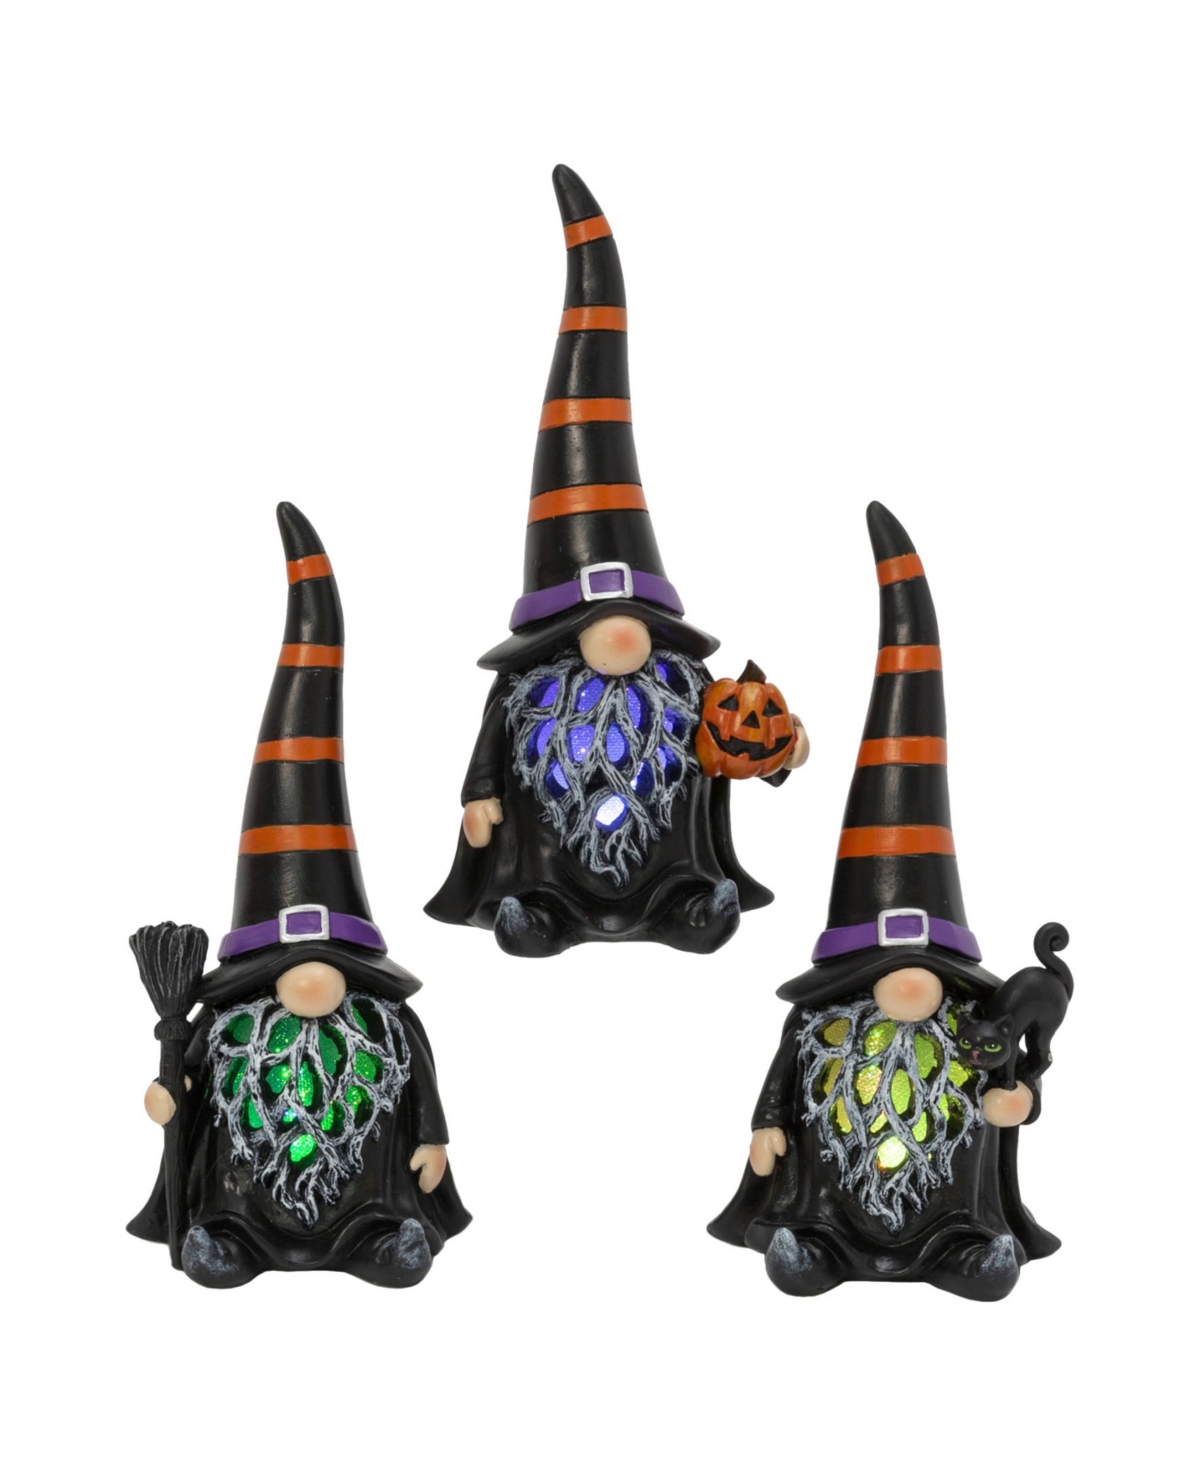 8.6" Battery Operated Lighted Halloween Gnome with Timer Set, 3 Pieces - Multicolor